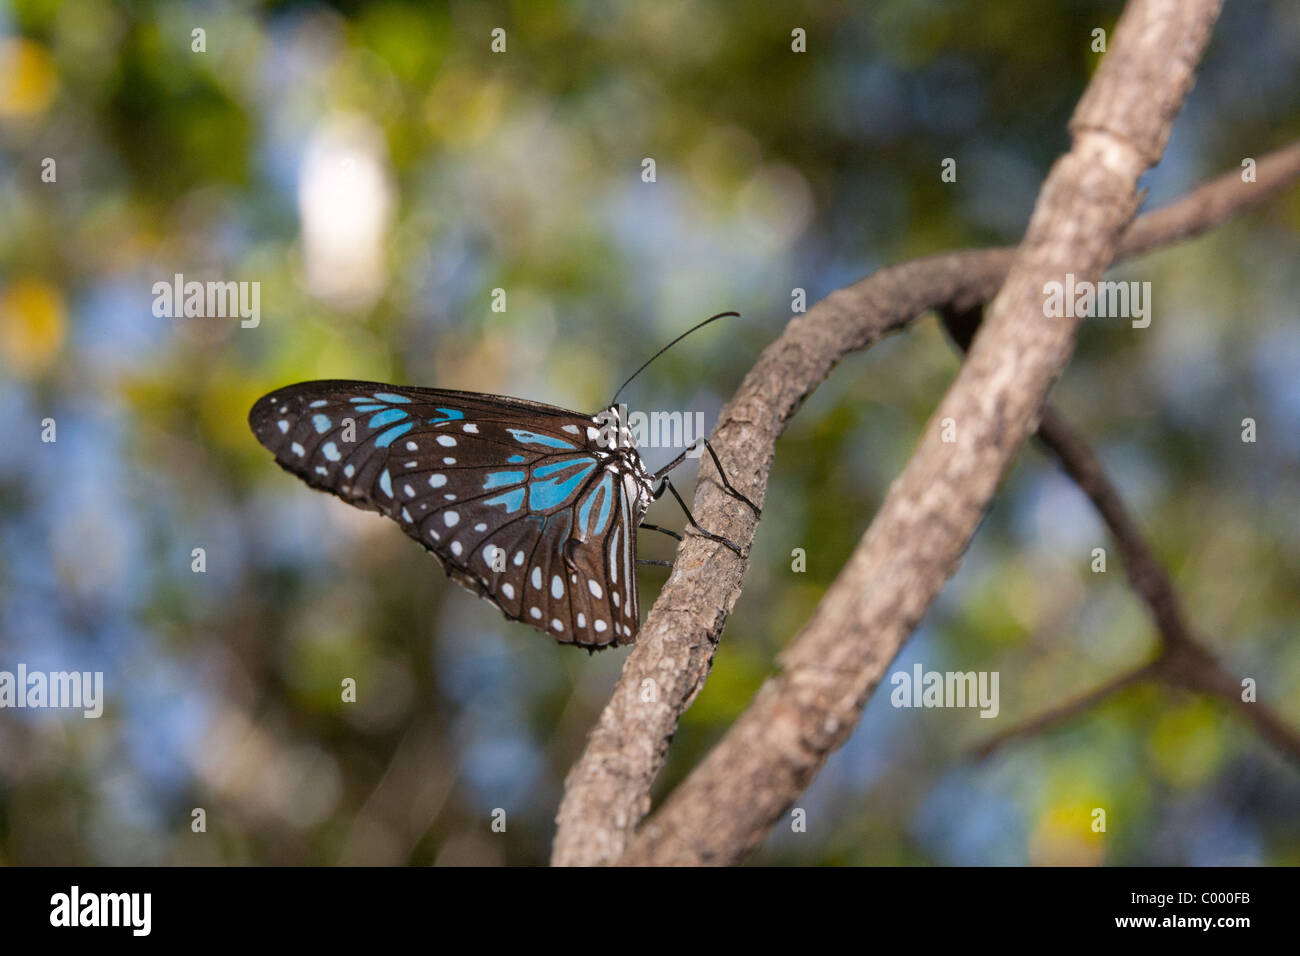 Blue Tiger Butterfly (Tirumala hamata) on twig in butterfly sanctuary, Magnetic Island, Townsville, Queensland, Australia. Stock Photo